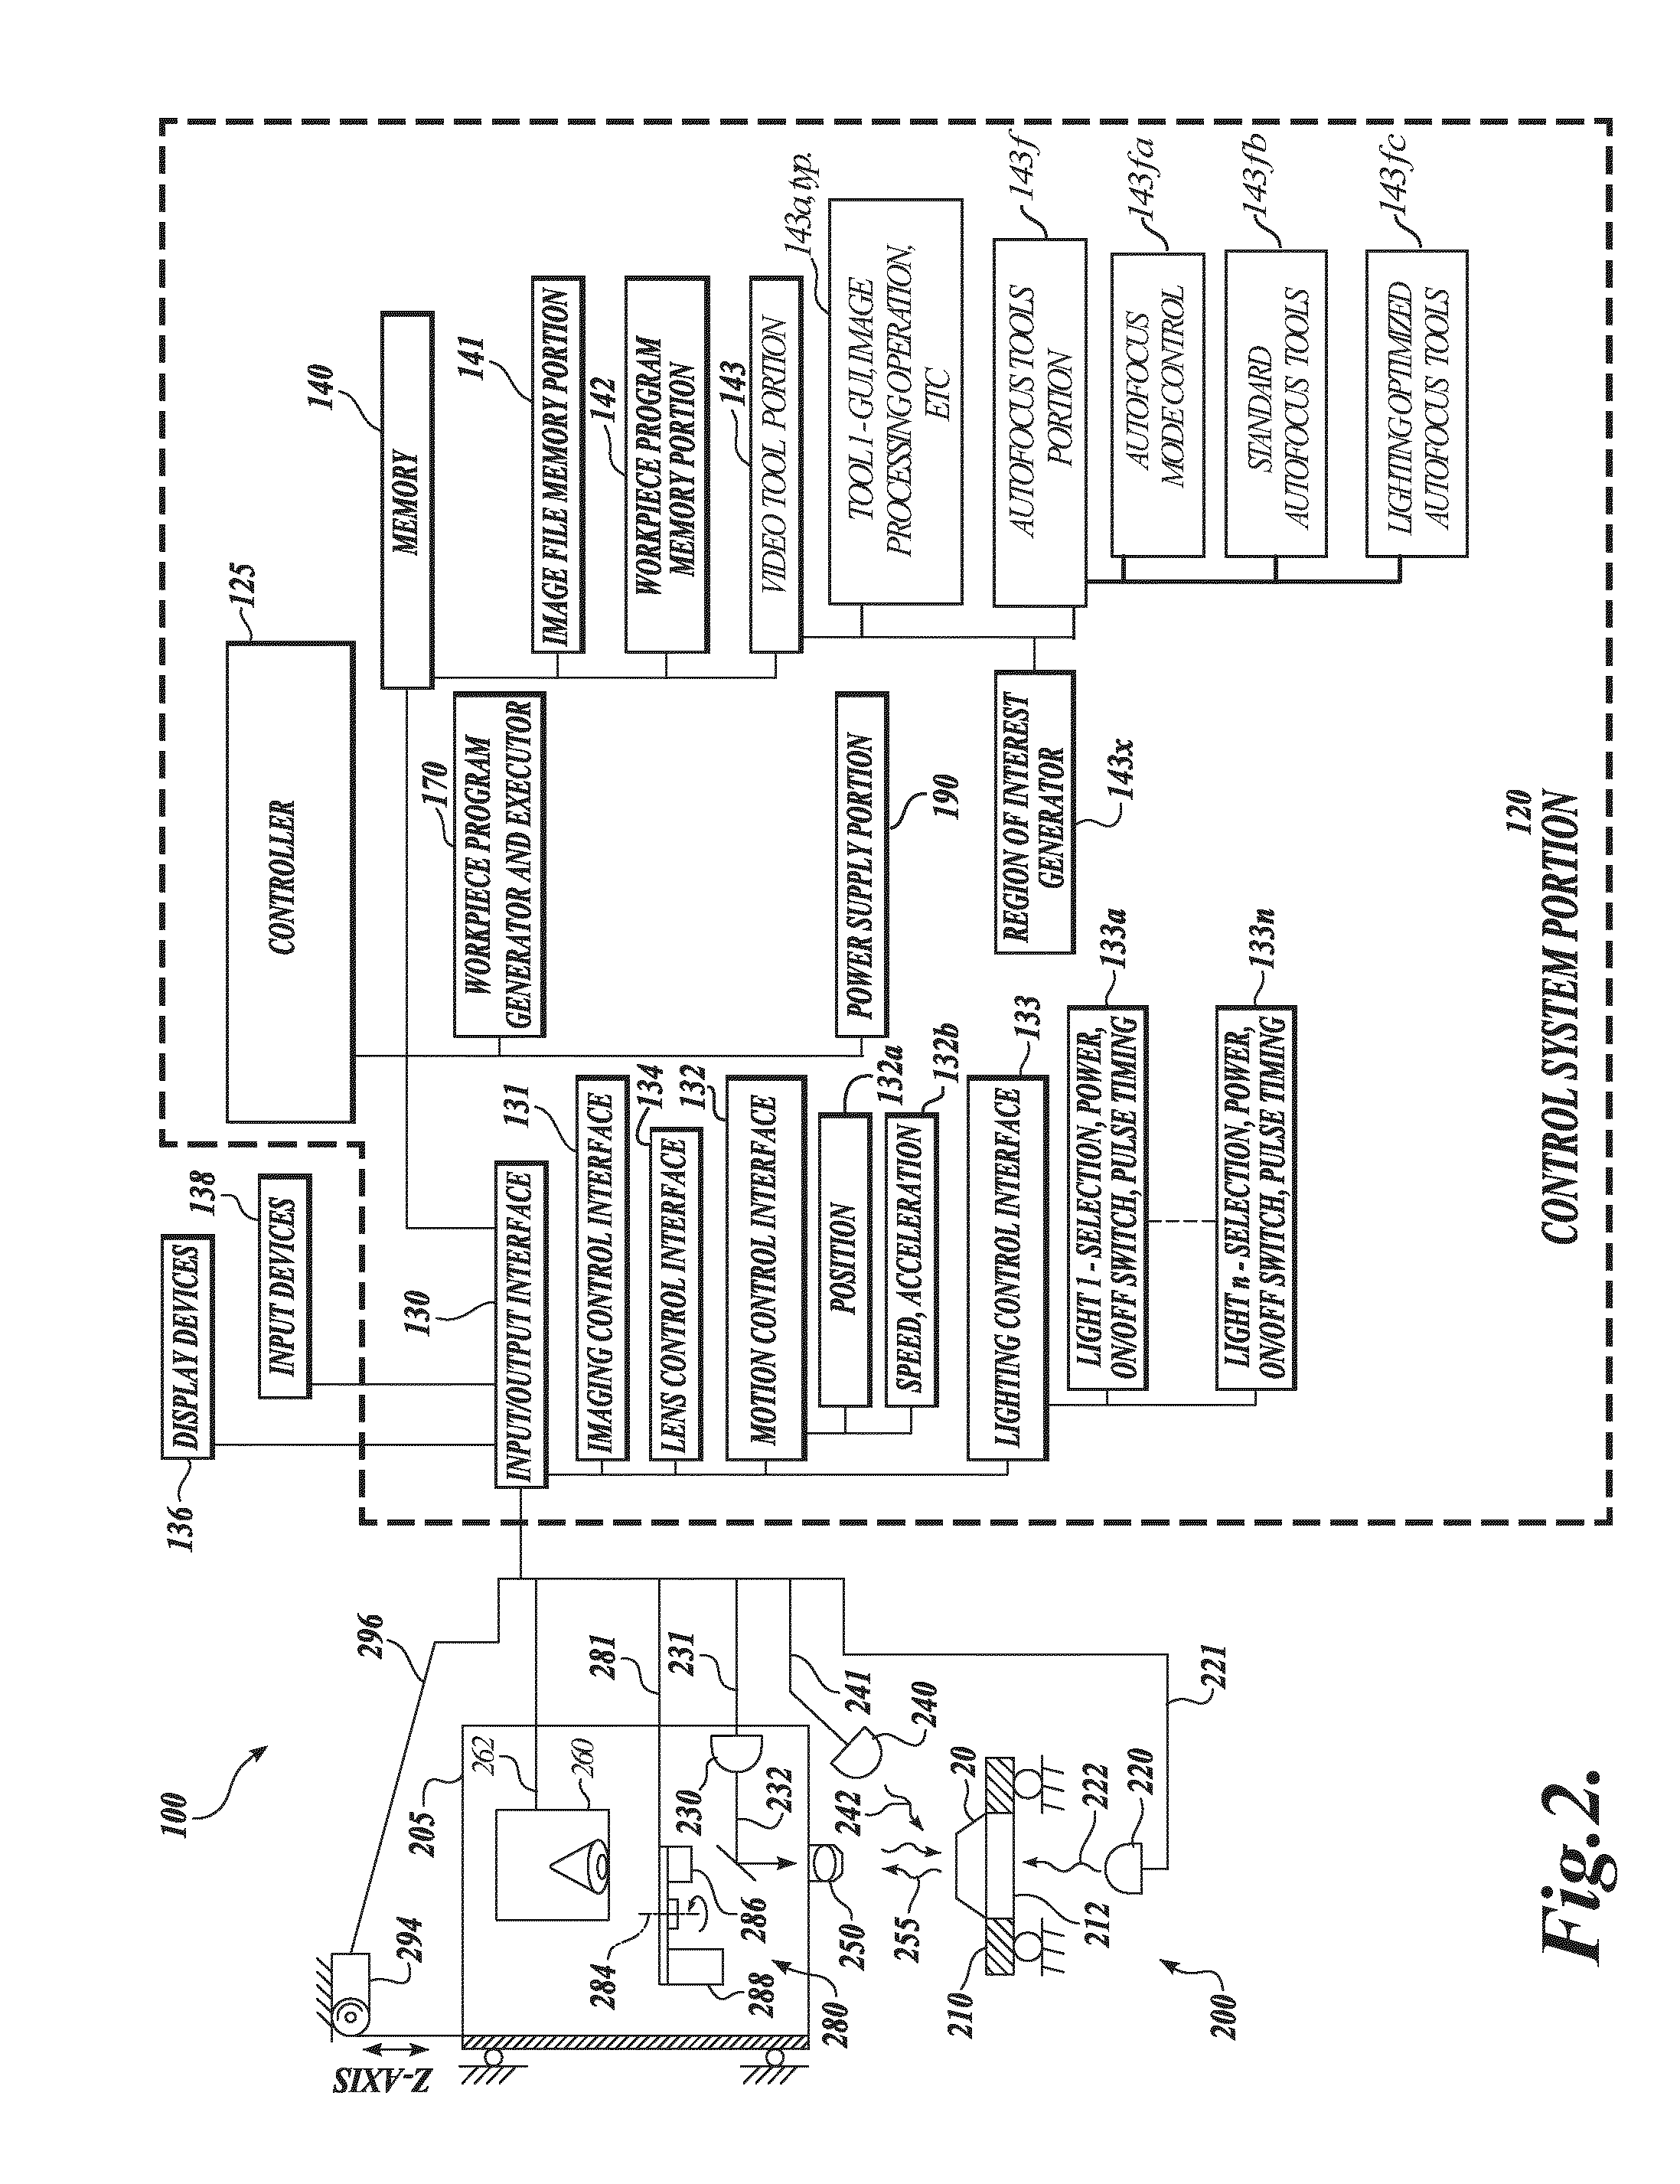 Autofocus video tool and method for precise dimensional inspection